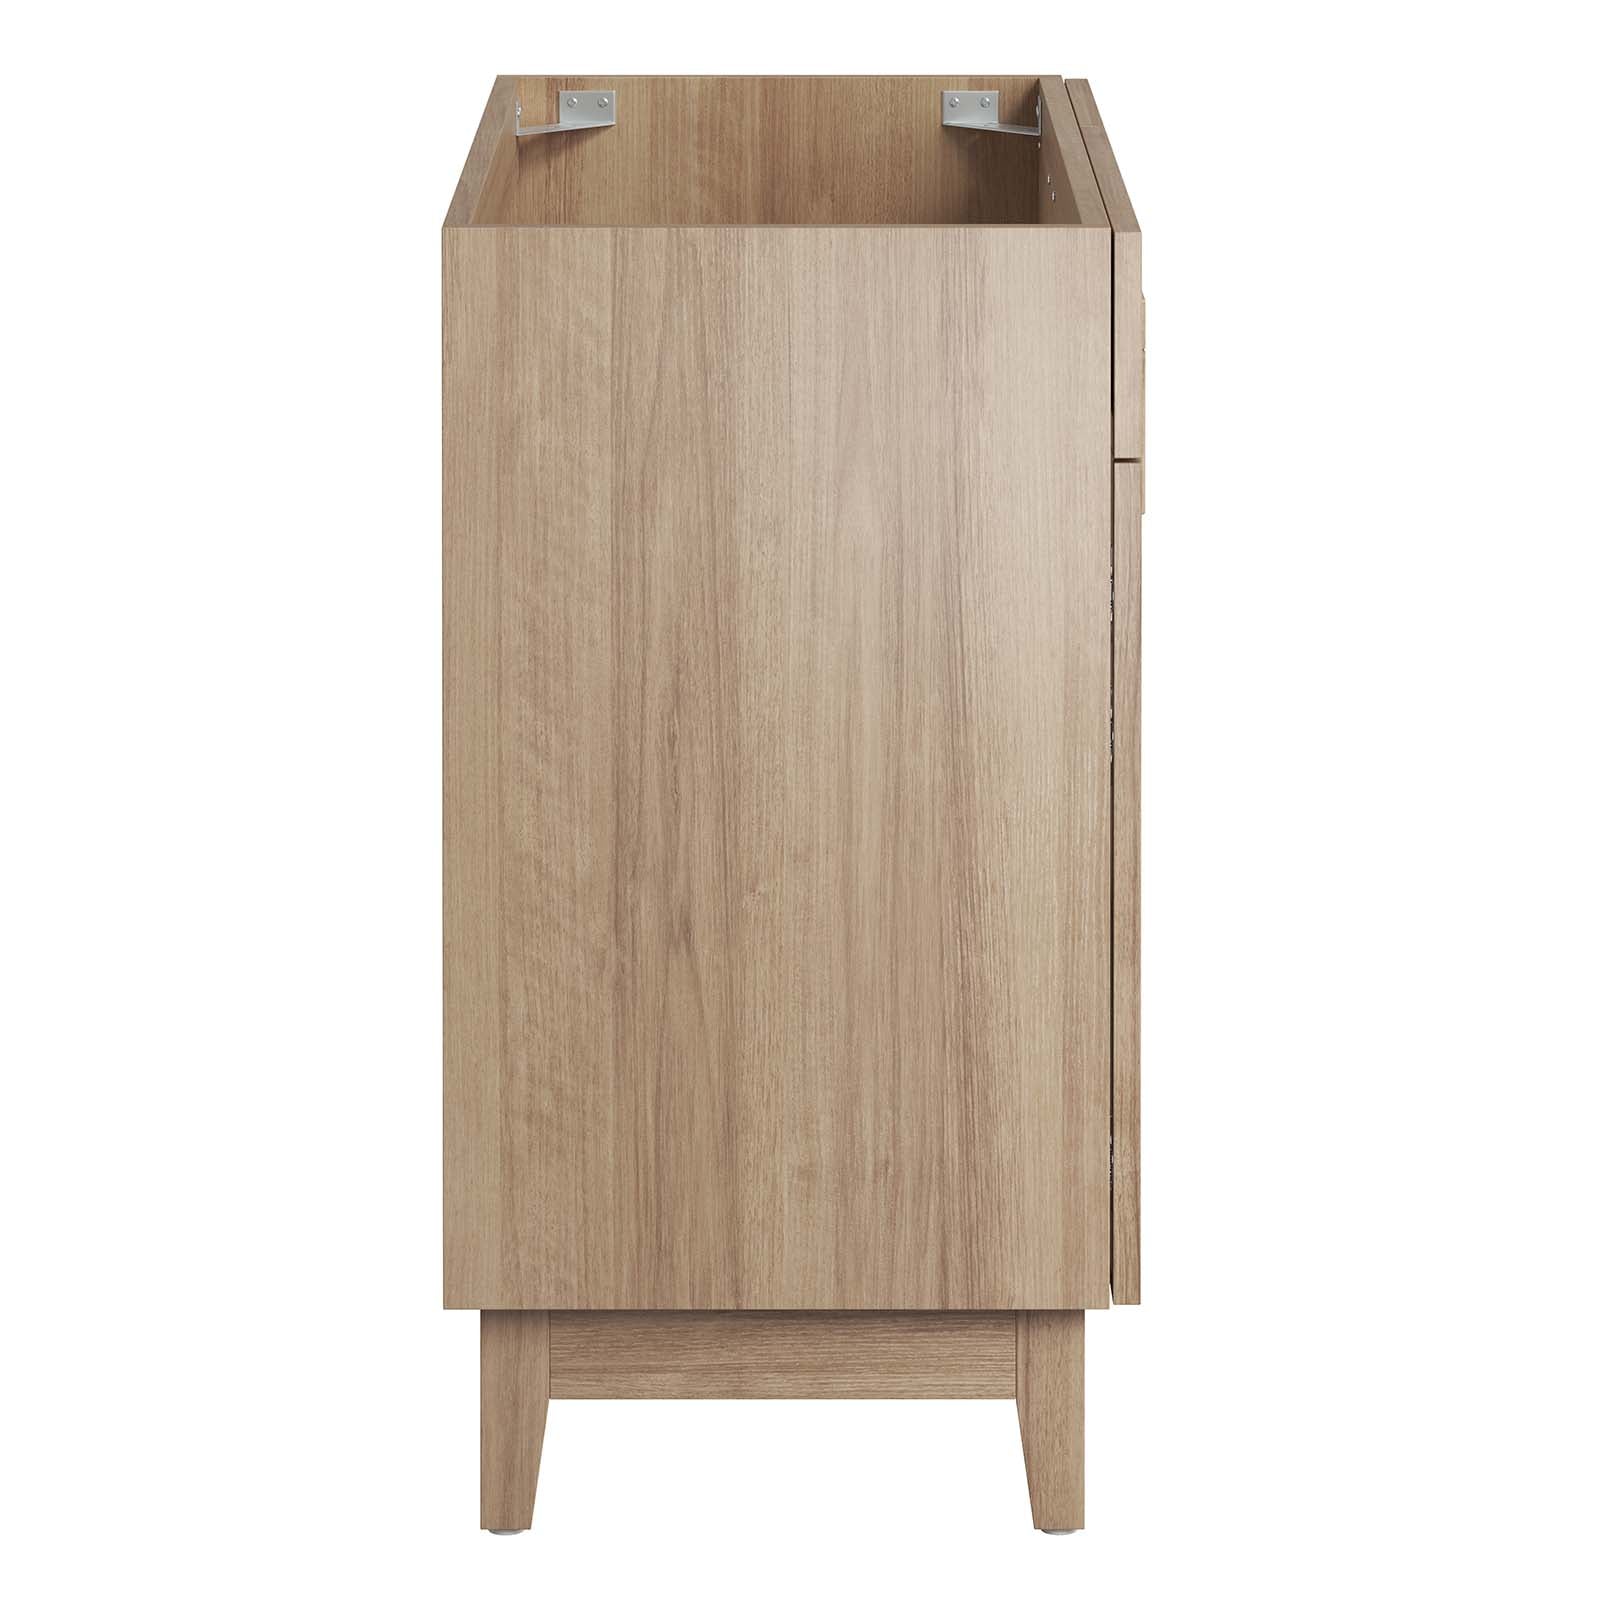 Miles 36” Bathroom Vanity Cabinet (Sink Basin Not Included) By Modway - EEI-6400 | Bathroom Accessories | Modway - 10